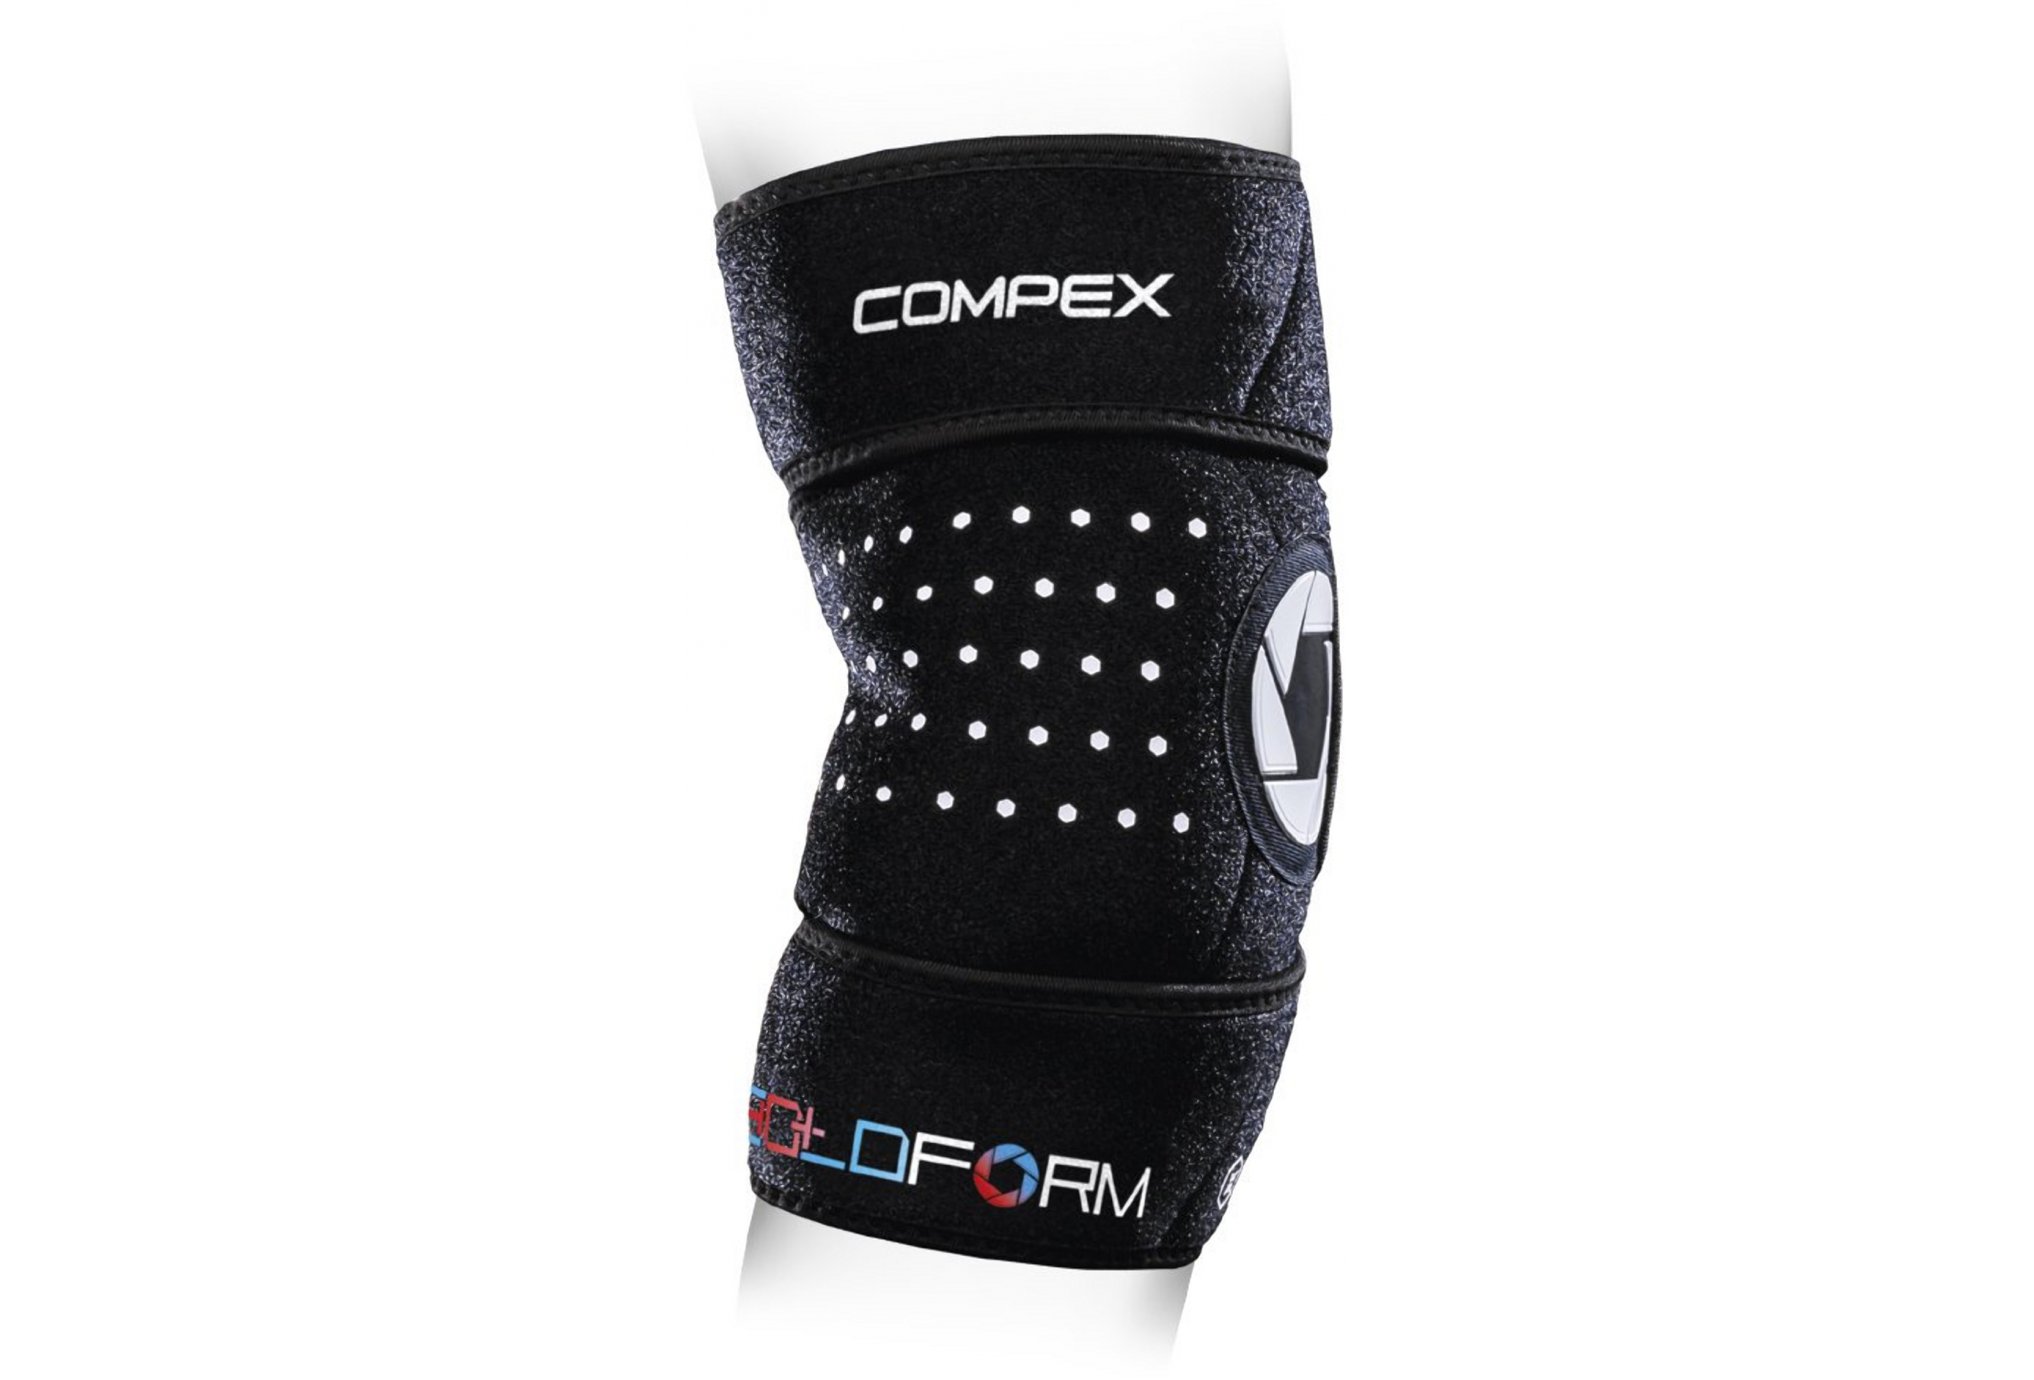 Compex Coldform Utility Protection musculaire & articulaire